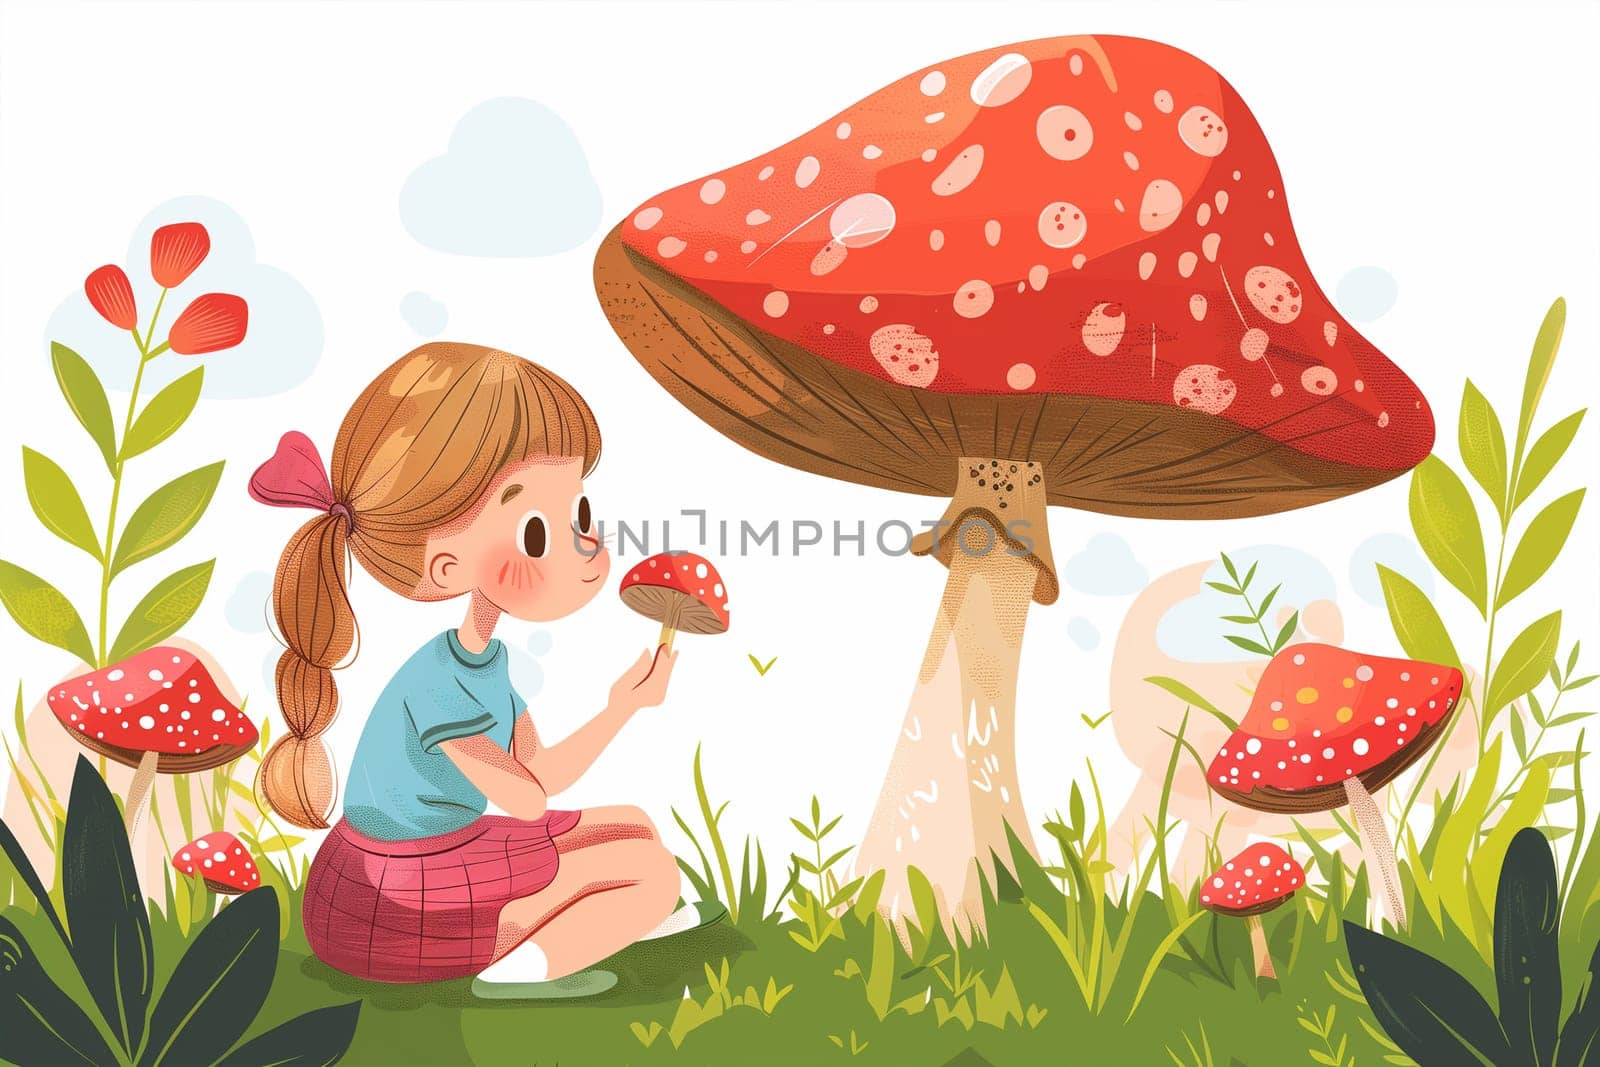 Curious Young Girl Exploring Giant Mushroom in Enchanted Forest at Daytime by Sd28DimoN_1976